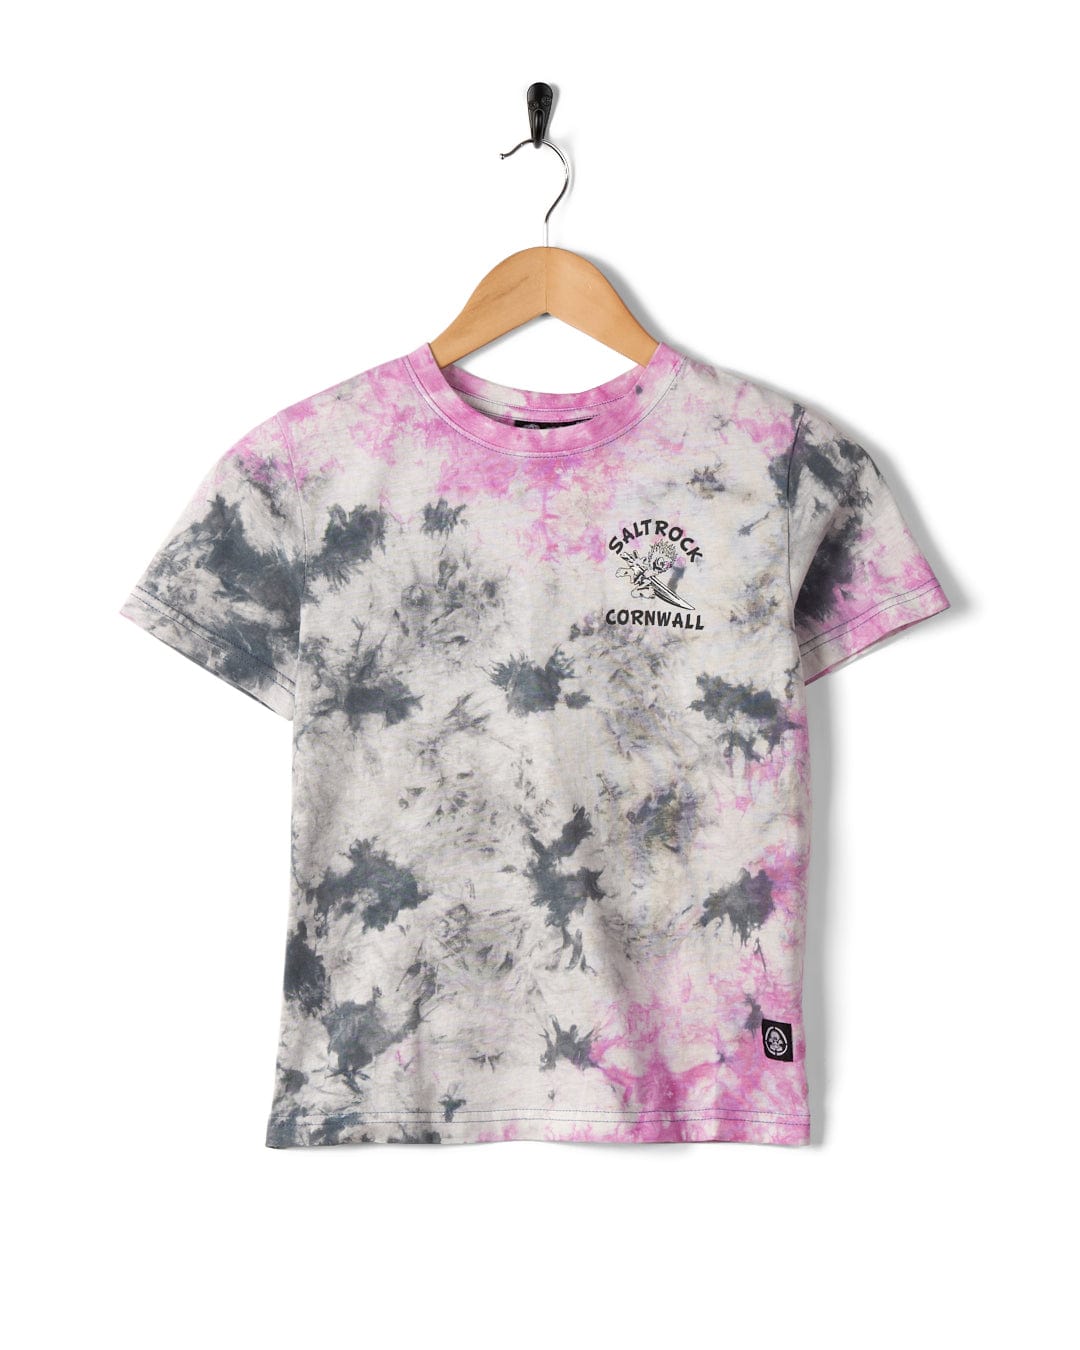 A Wave Rider Cornwall - Kids Tie Dye Short Sleeve T-Shirt in pink featuring Saltrock branding with black and pink patterns on a hanger against a white background.